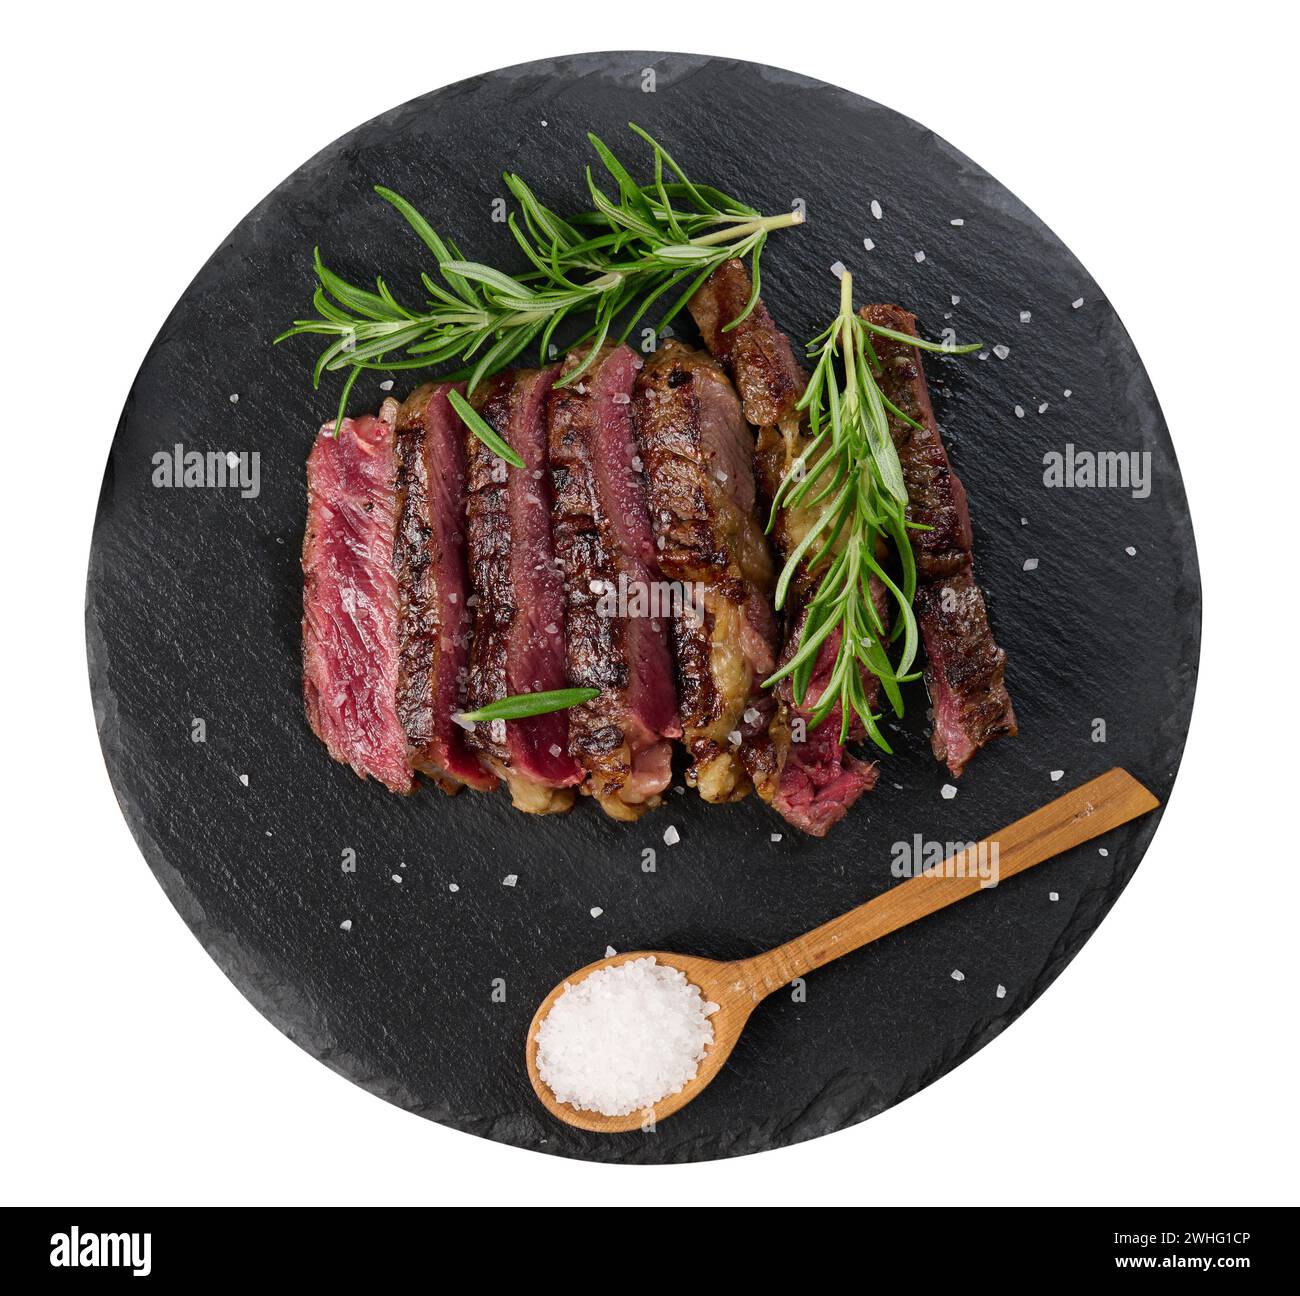 Fried piece of beef ribeye cut into pieces on a black board, rare degree of doneness. Delicious stea Stock Photo